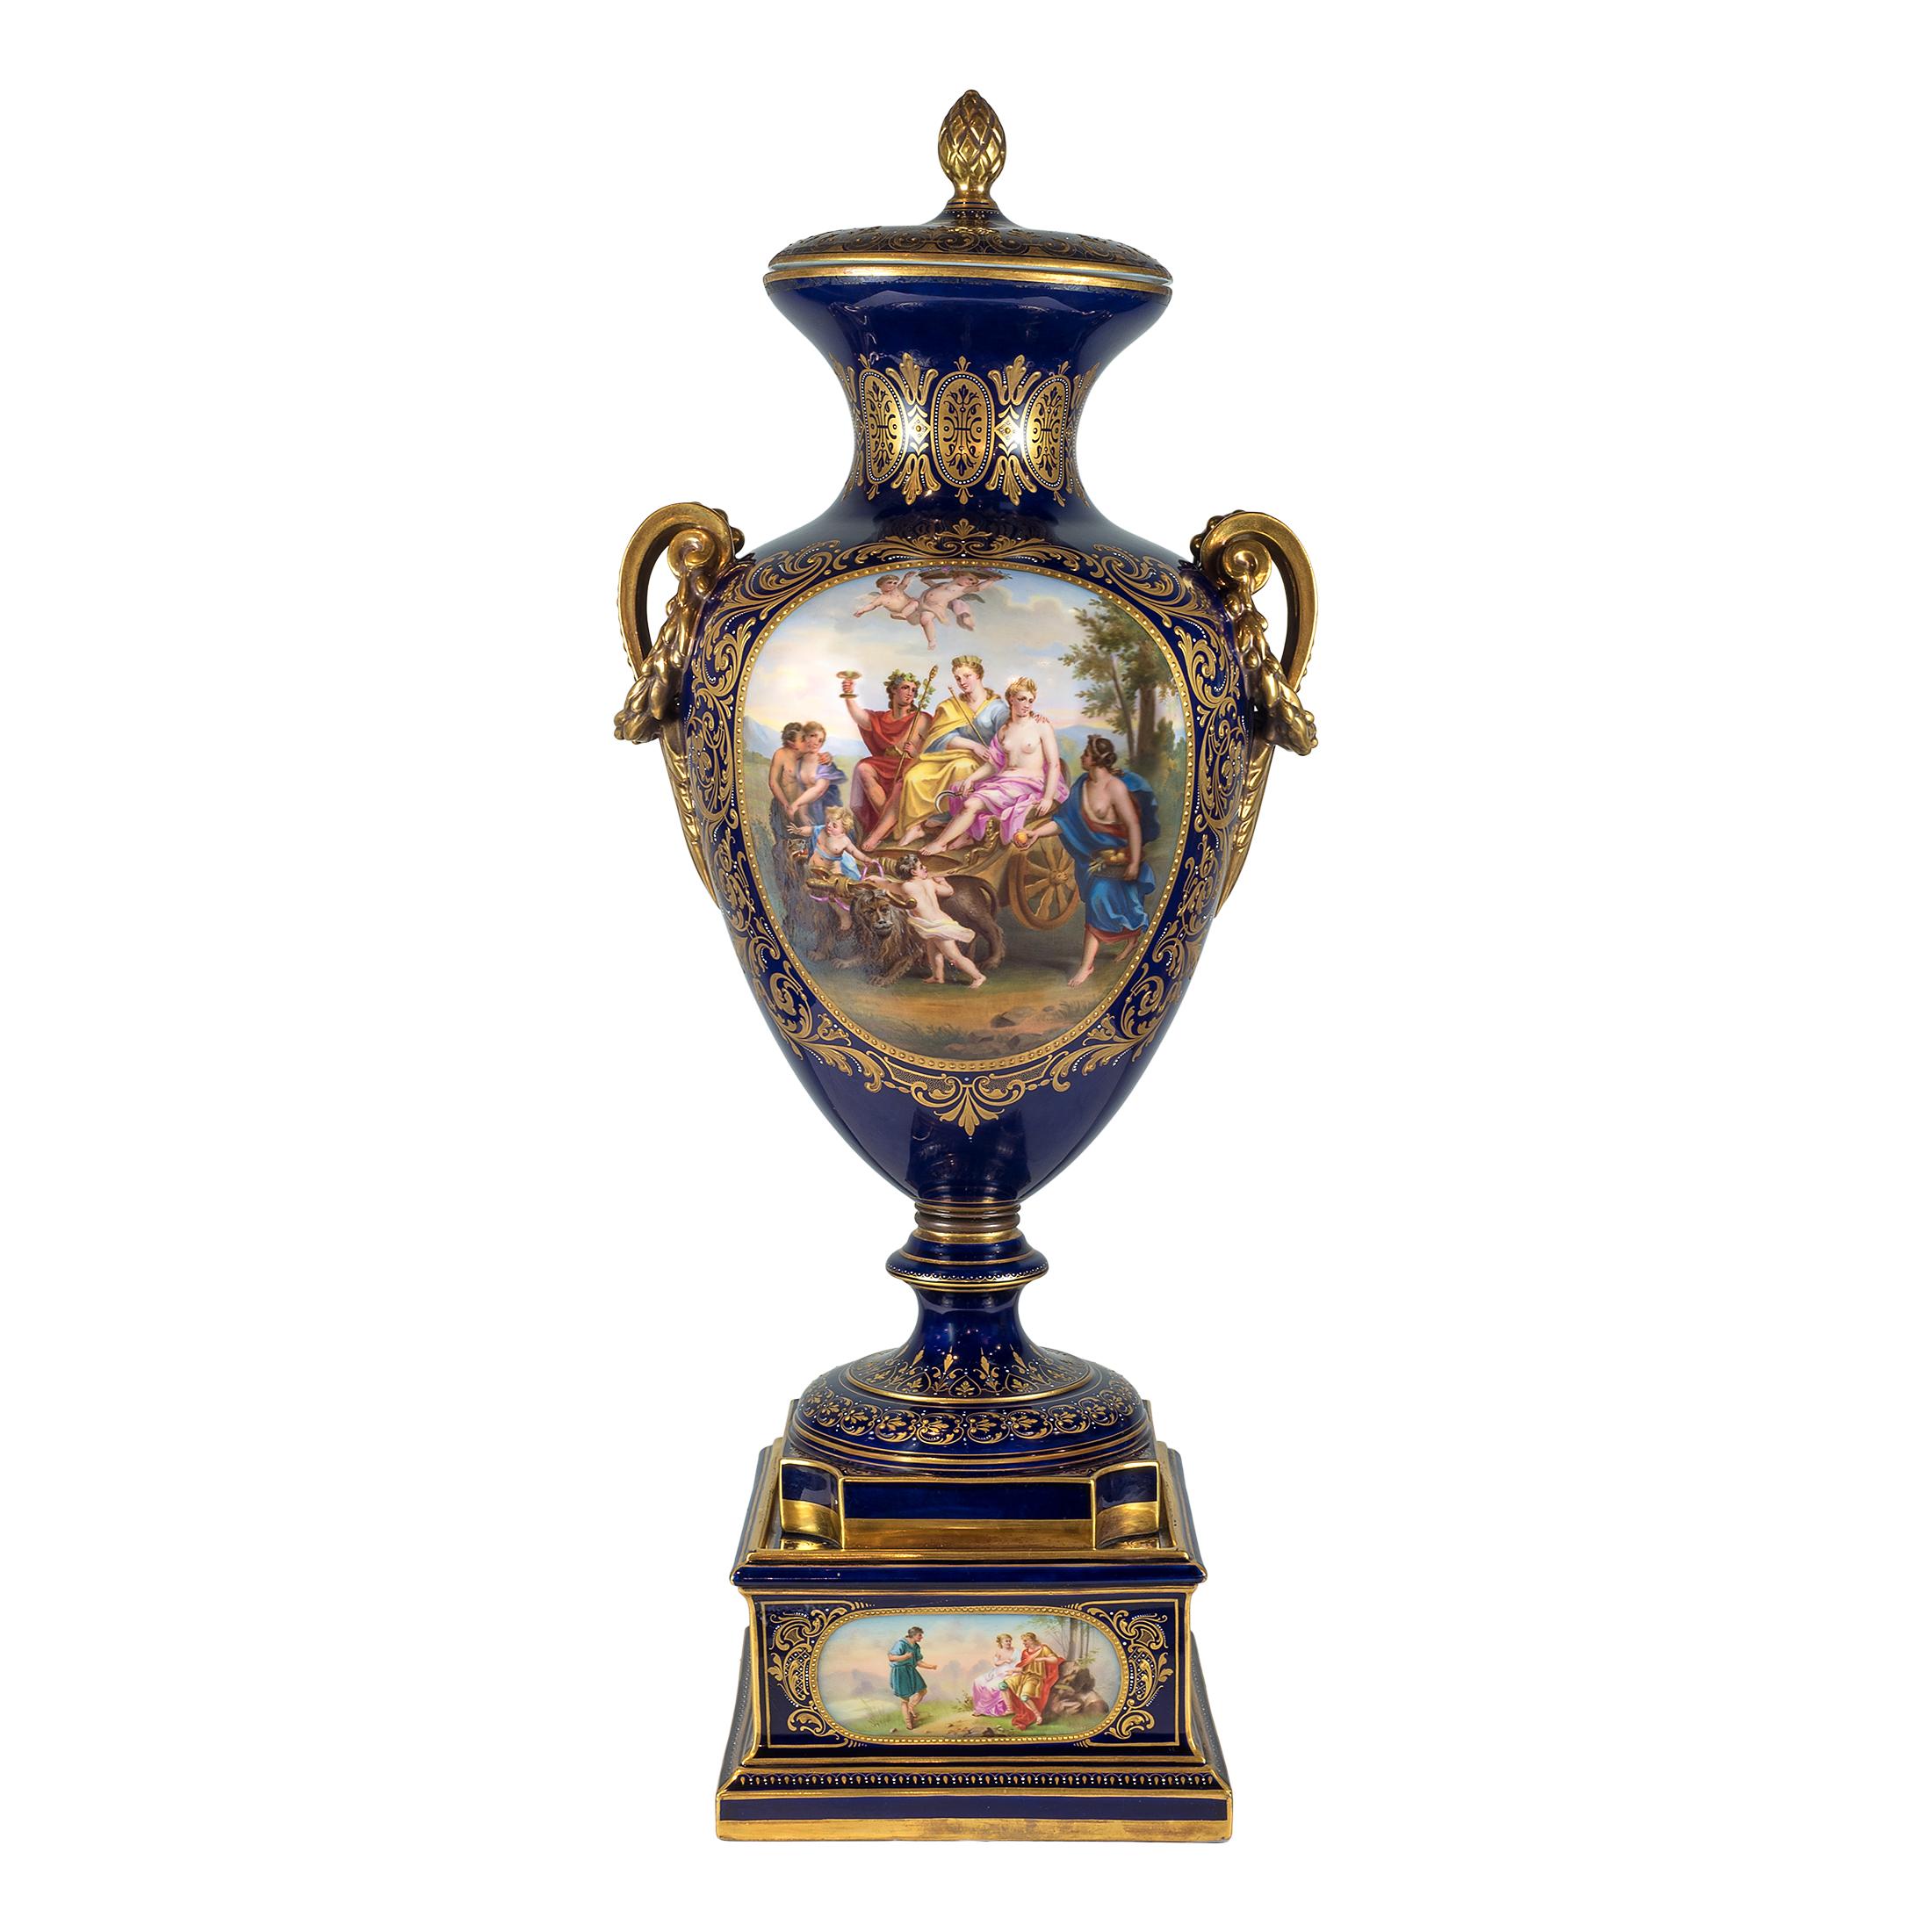 Highly important pair of royal Vienna painted porcelain urn and cover
Painted with two large allegorical scenes. Cobalt blue ground with gold raised decoration and two handles. Signed ‘F. Koller’.

Origin: Austria
Date: 19th century
Dimension: